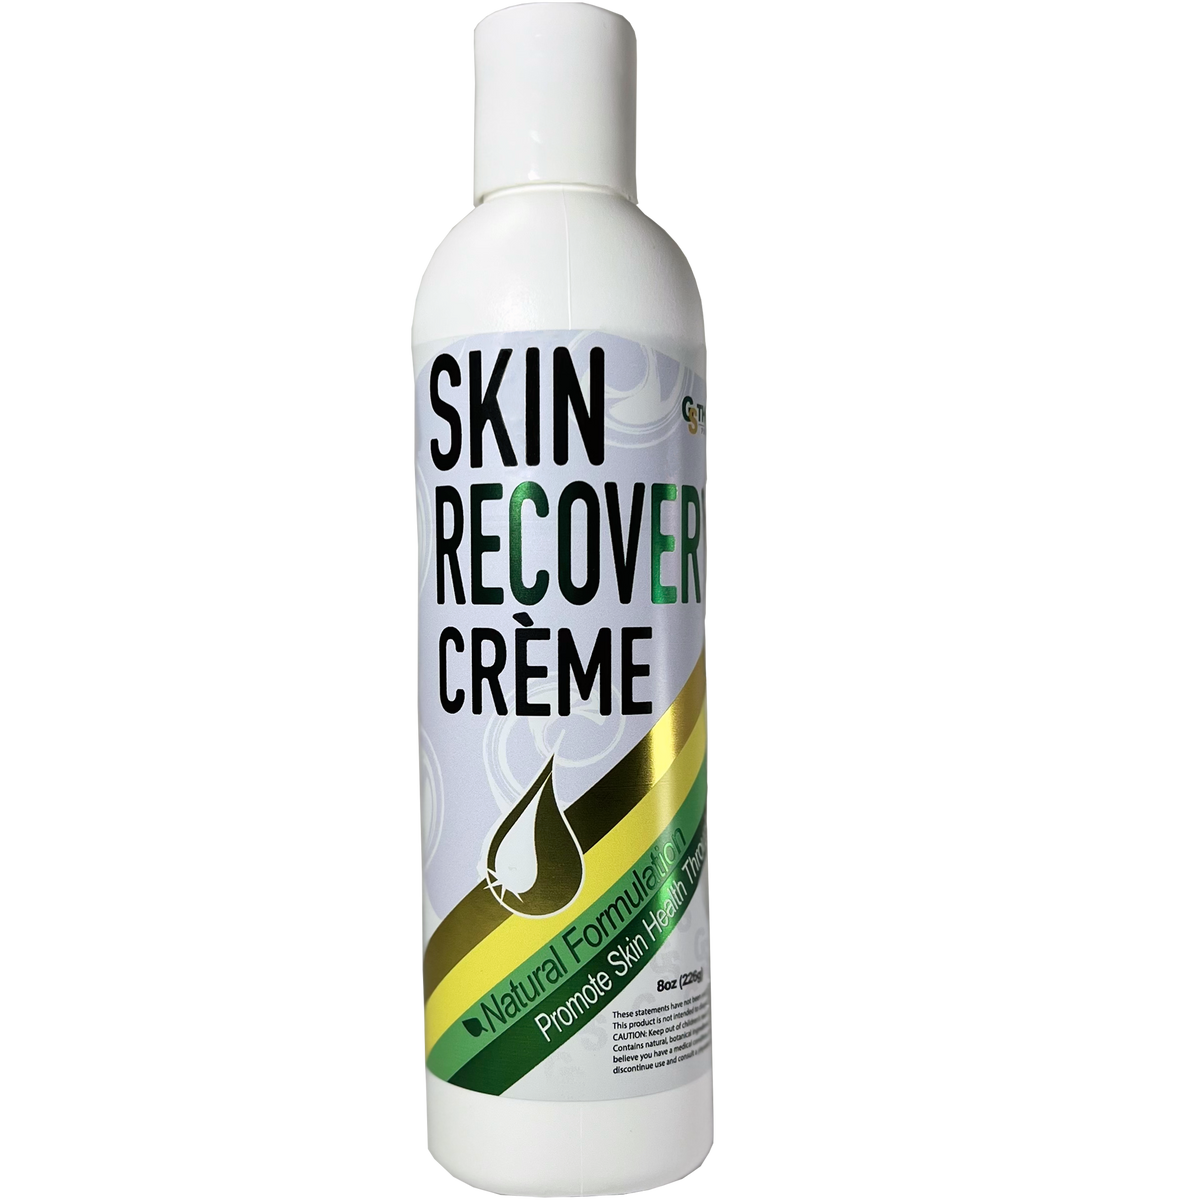 Skin Recovery Crème